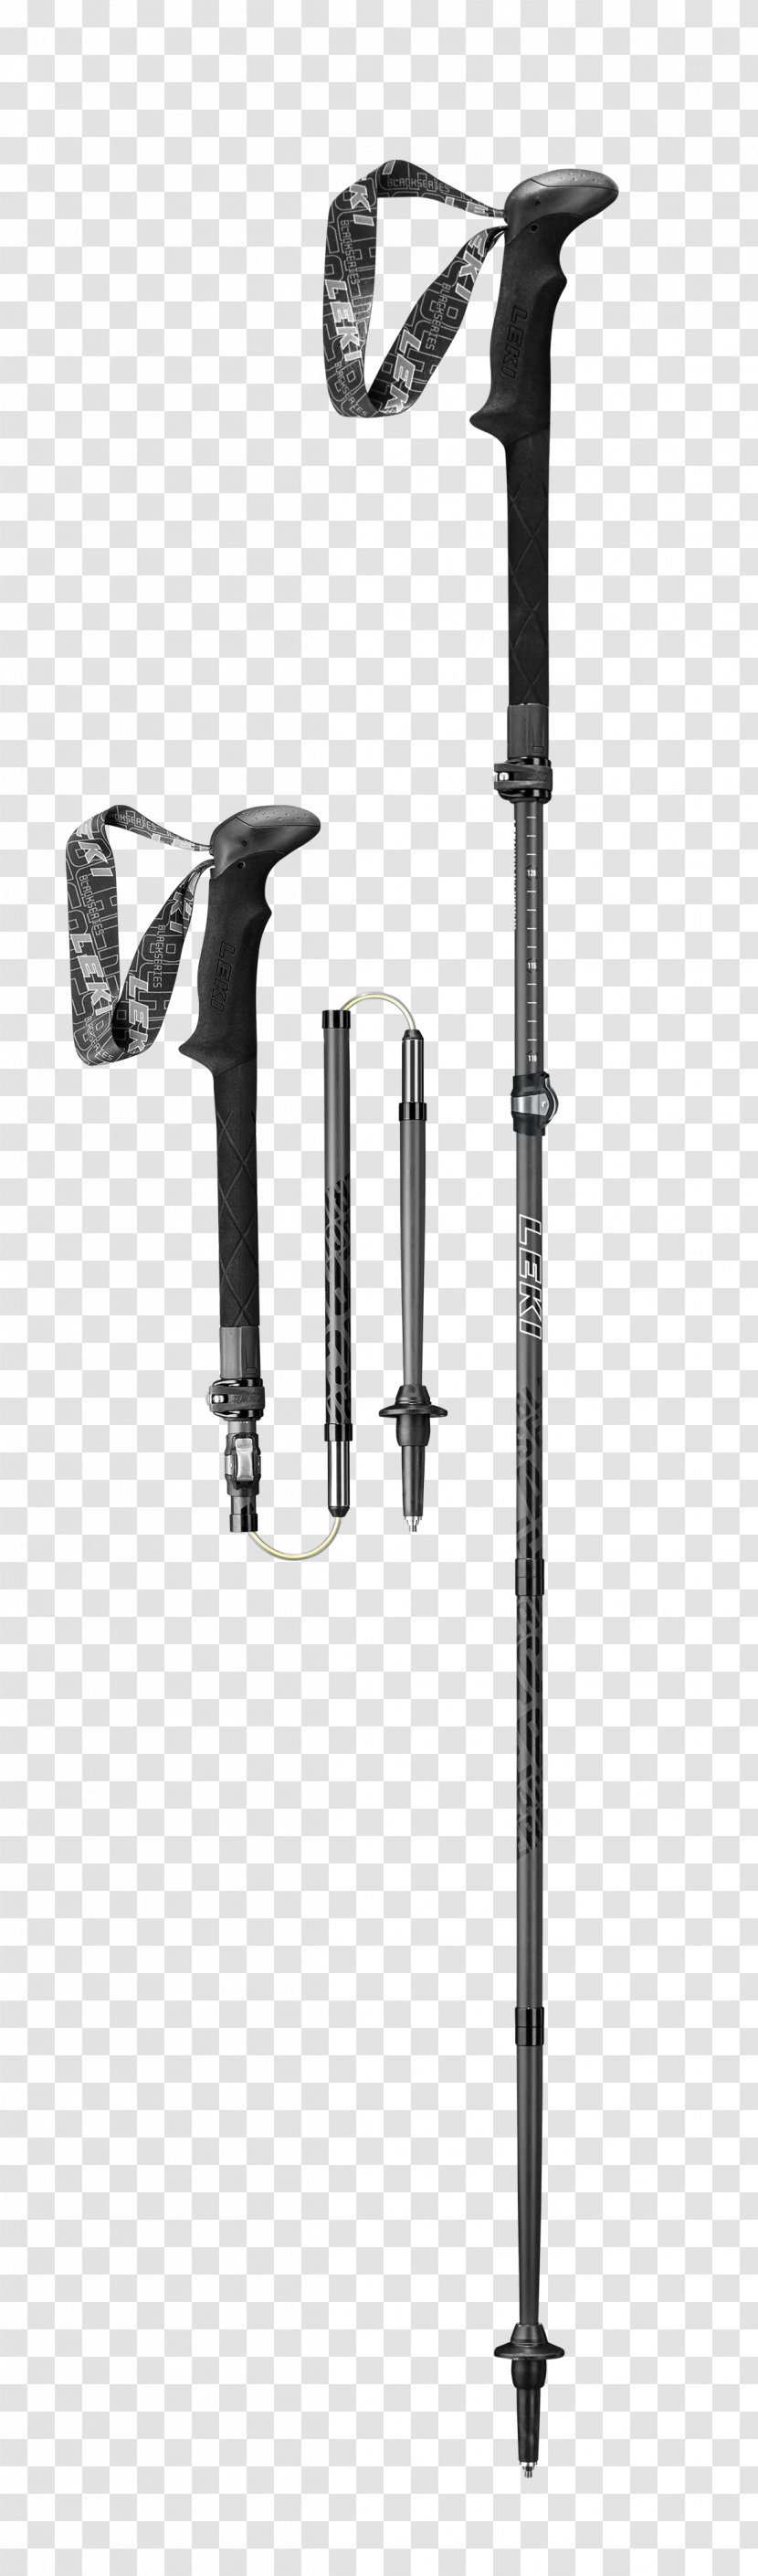 Hiking Poles Equipment Backcountry.com Mountaineering - Ice Axe - Ski Transparent PNG